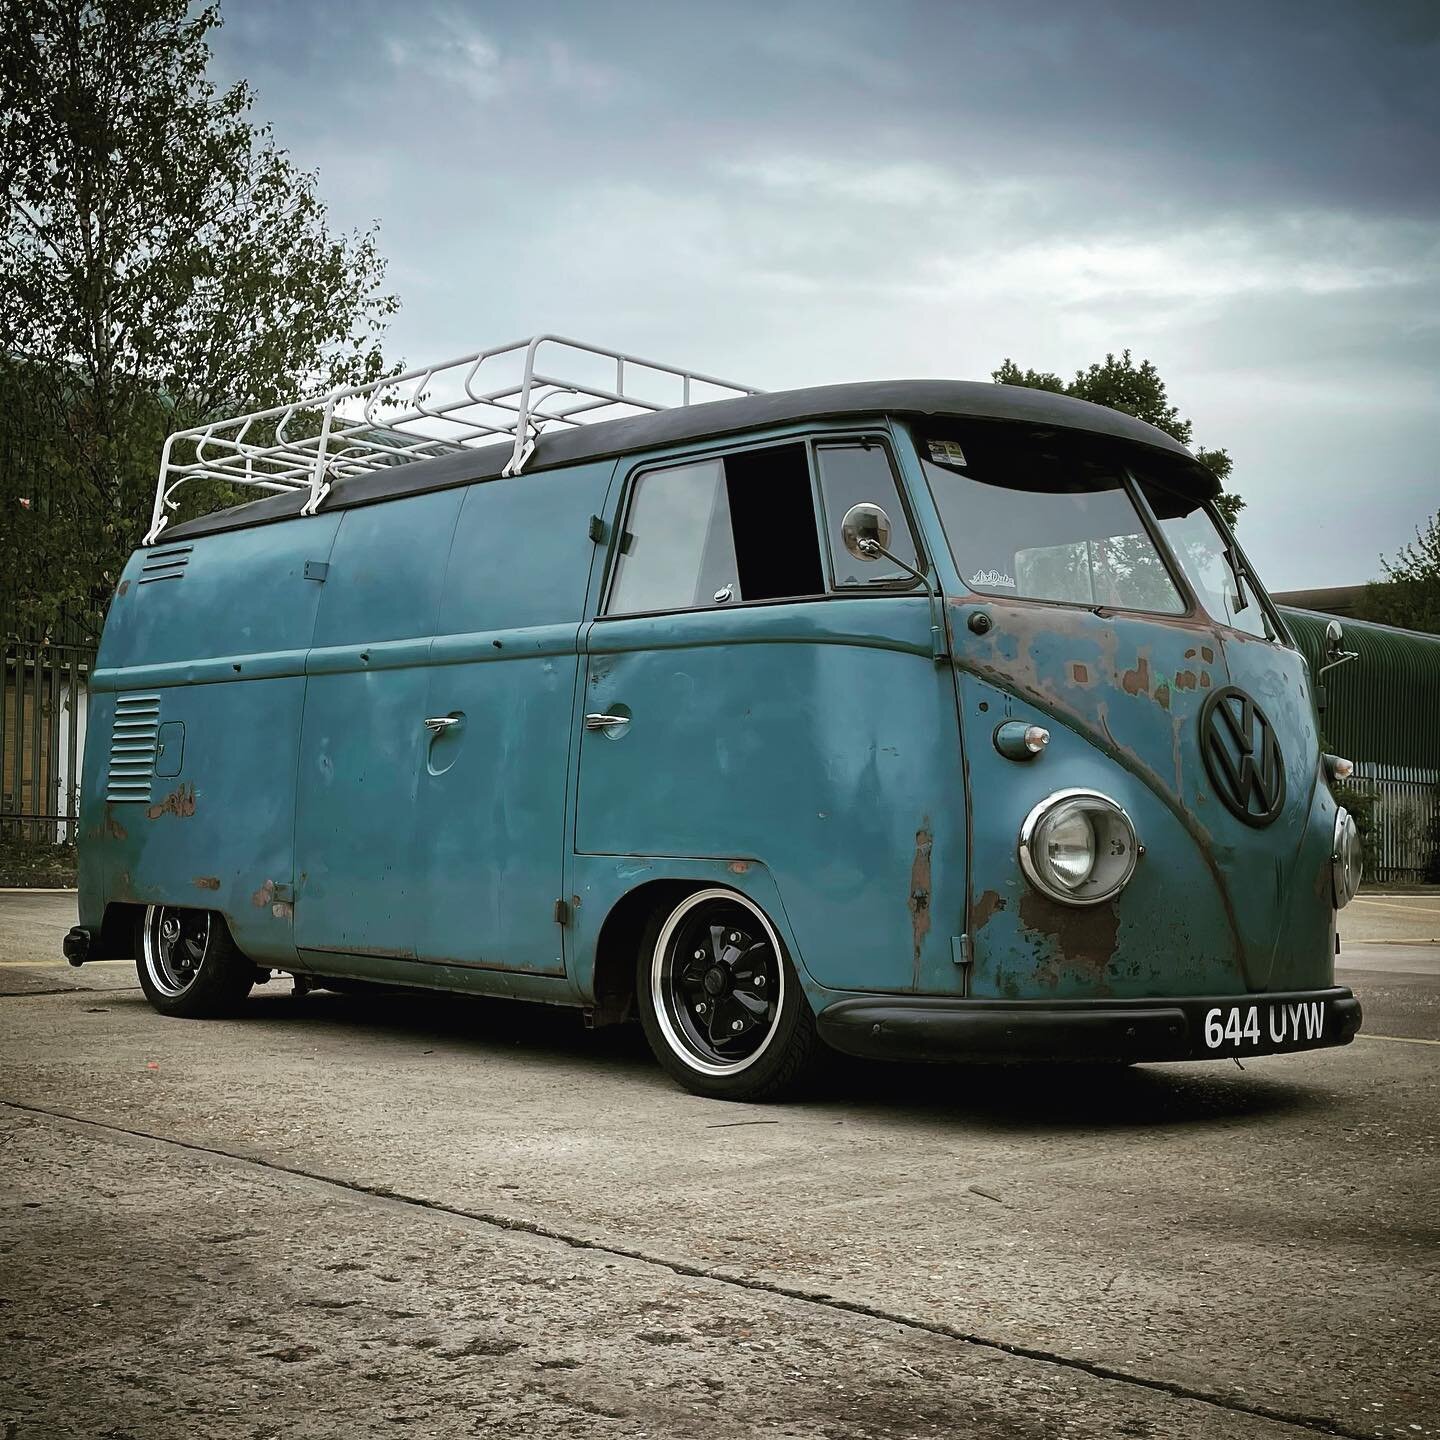 I am the proud new owner of this bus and I&rsquo;m absolutely chuffed! 

Today&rsquo;s YouTube video explains more, I hope you like it!
 ⠀⠀⠀⠀⠀⠀⠀⠀⠀⠀⠀⠀
I can&rsquo;t wait to take it to some shows very soon, love it! 
 ⠀⠀⠀⠀⠀⠀⠀⠀⠀⠀⠀⠀
#vw #vwsplitscreen #s